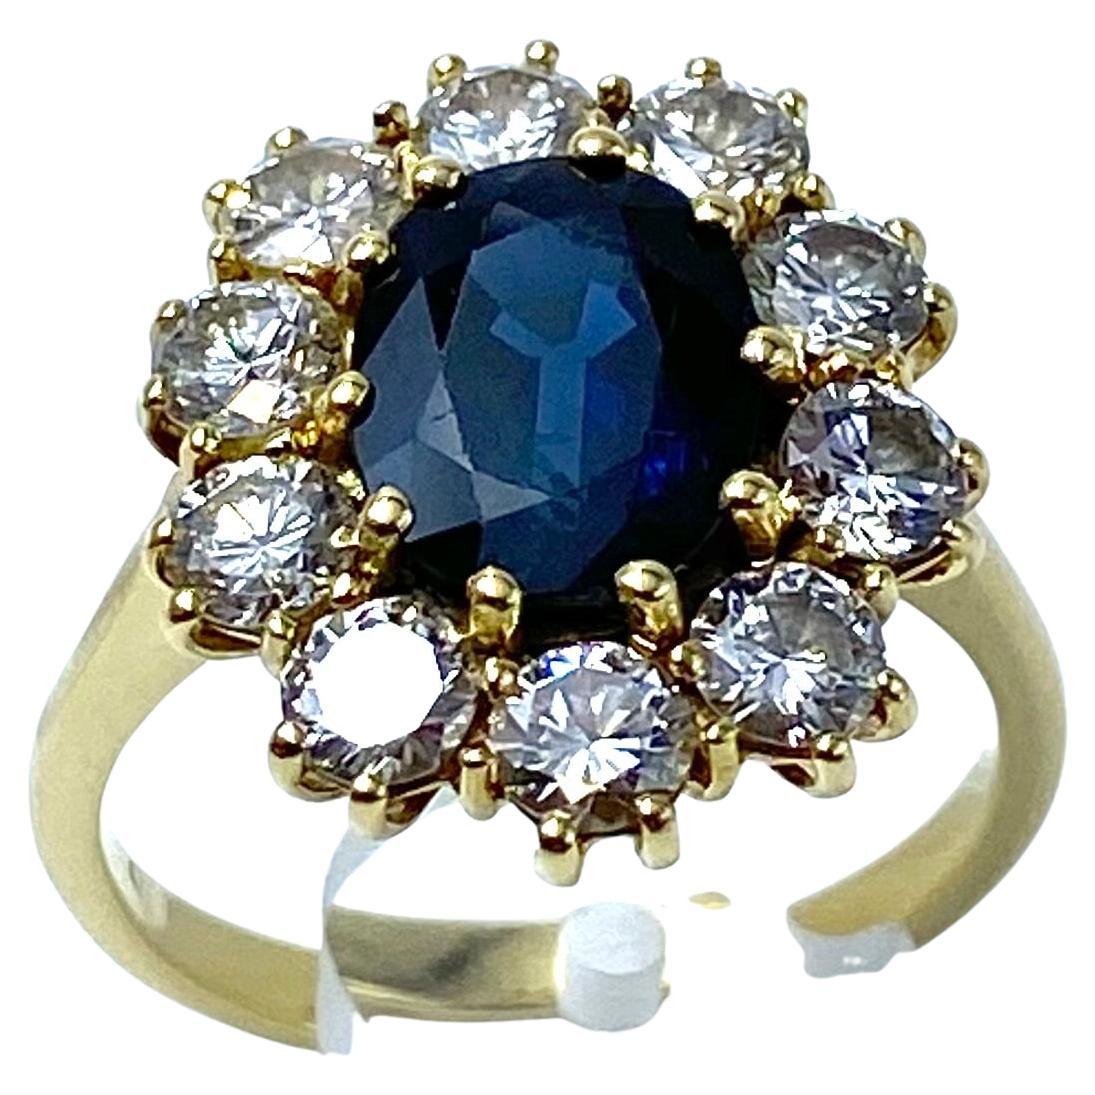 Sparkling Sapphire and Diamonds Ring